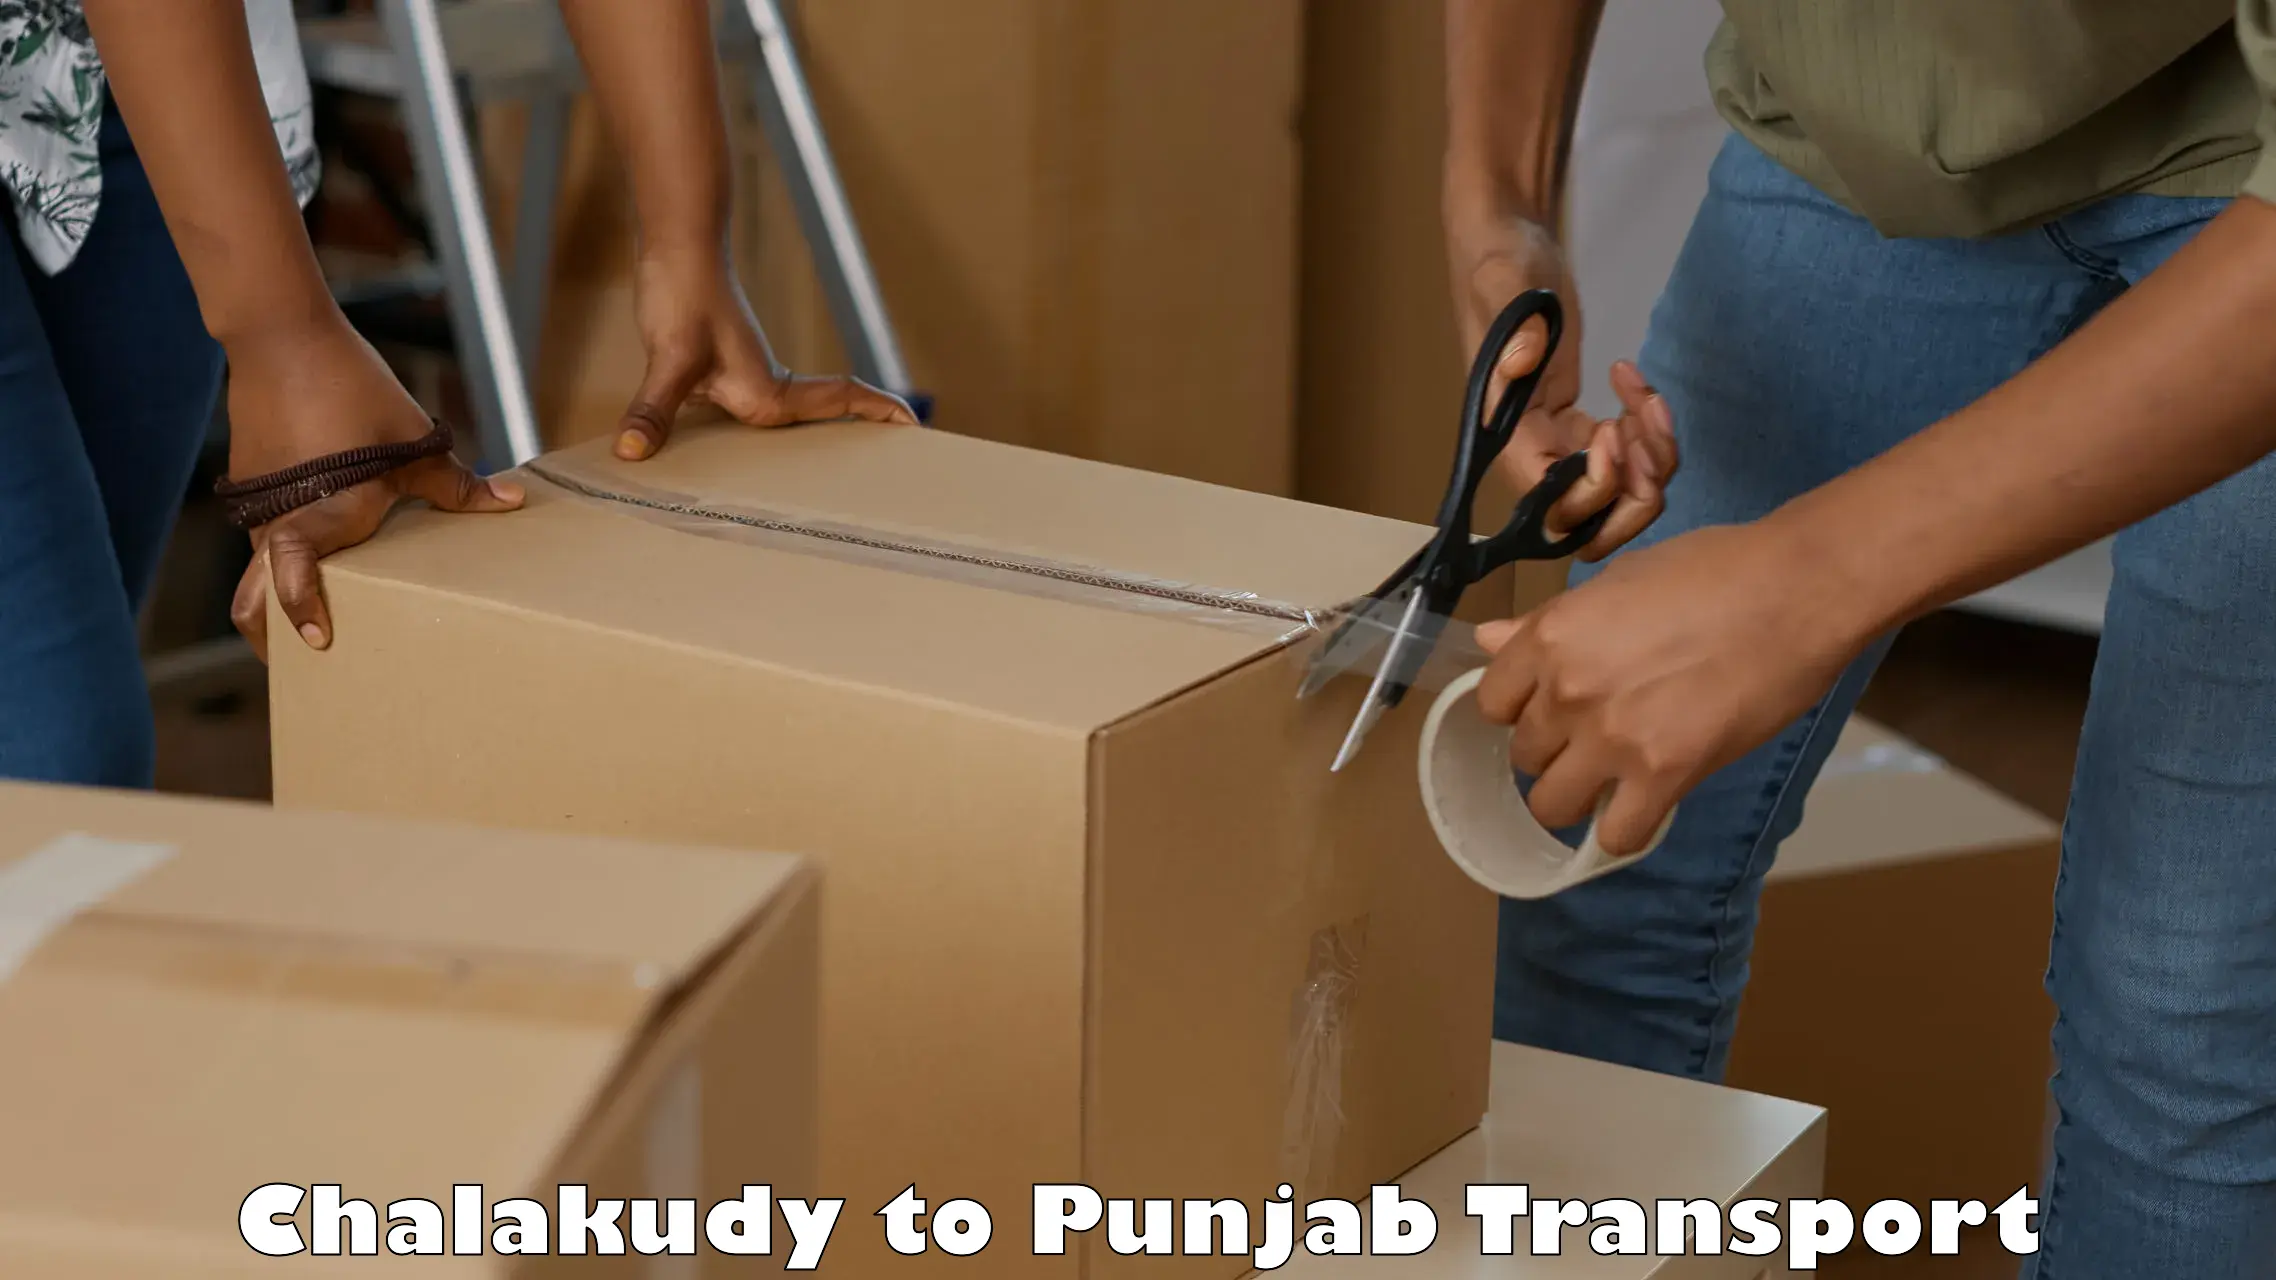 Container transport service Chalakudy to Mohali